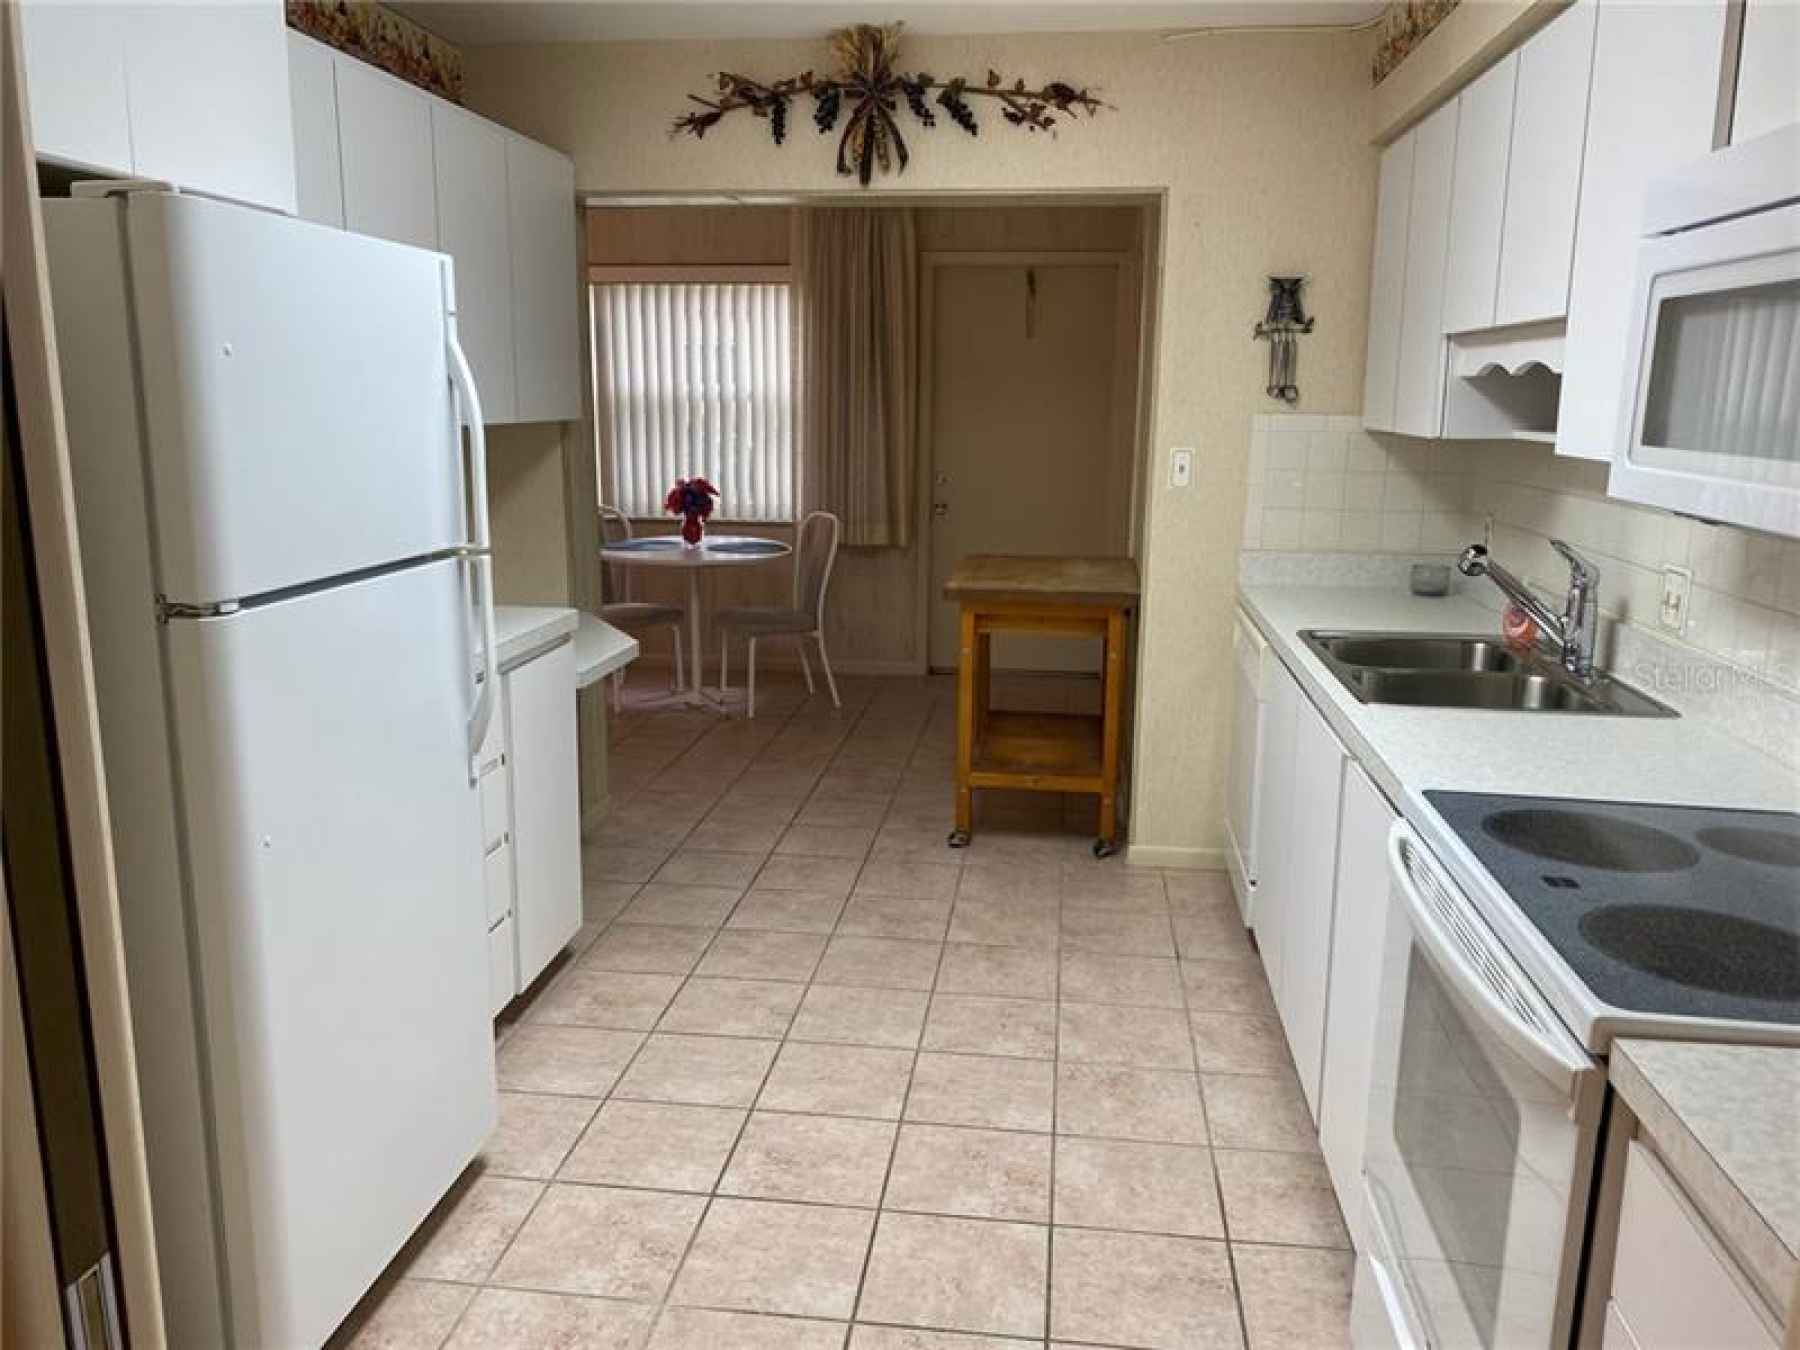 Spacious and Bright Kitchen! Island cart can be moved to center of Kitchen as needed.